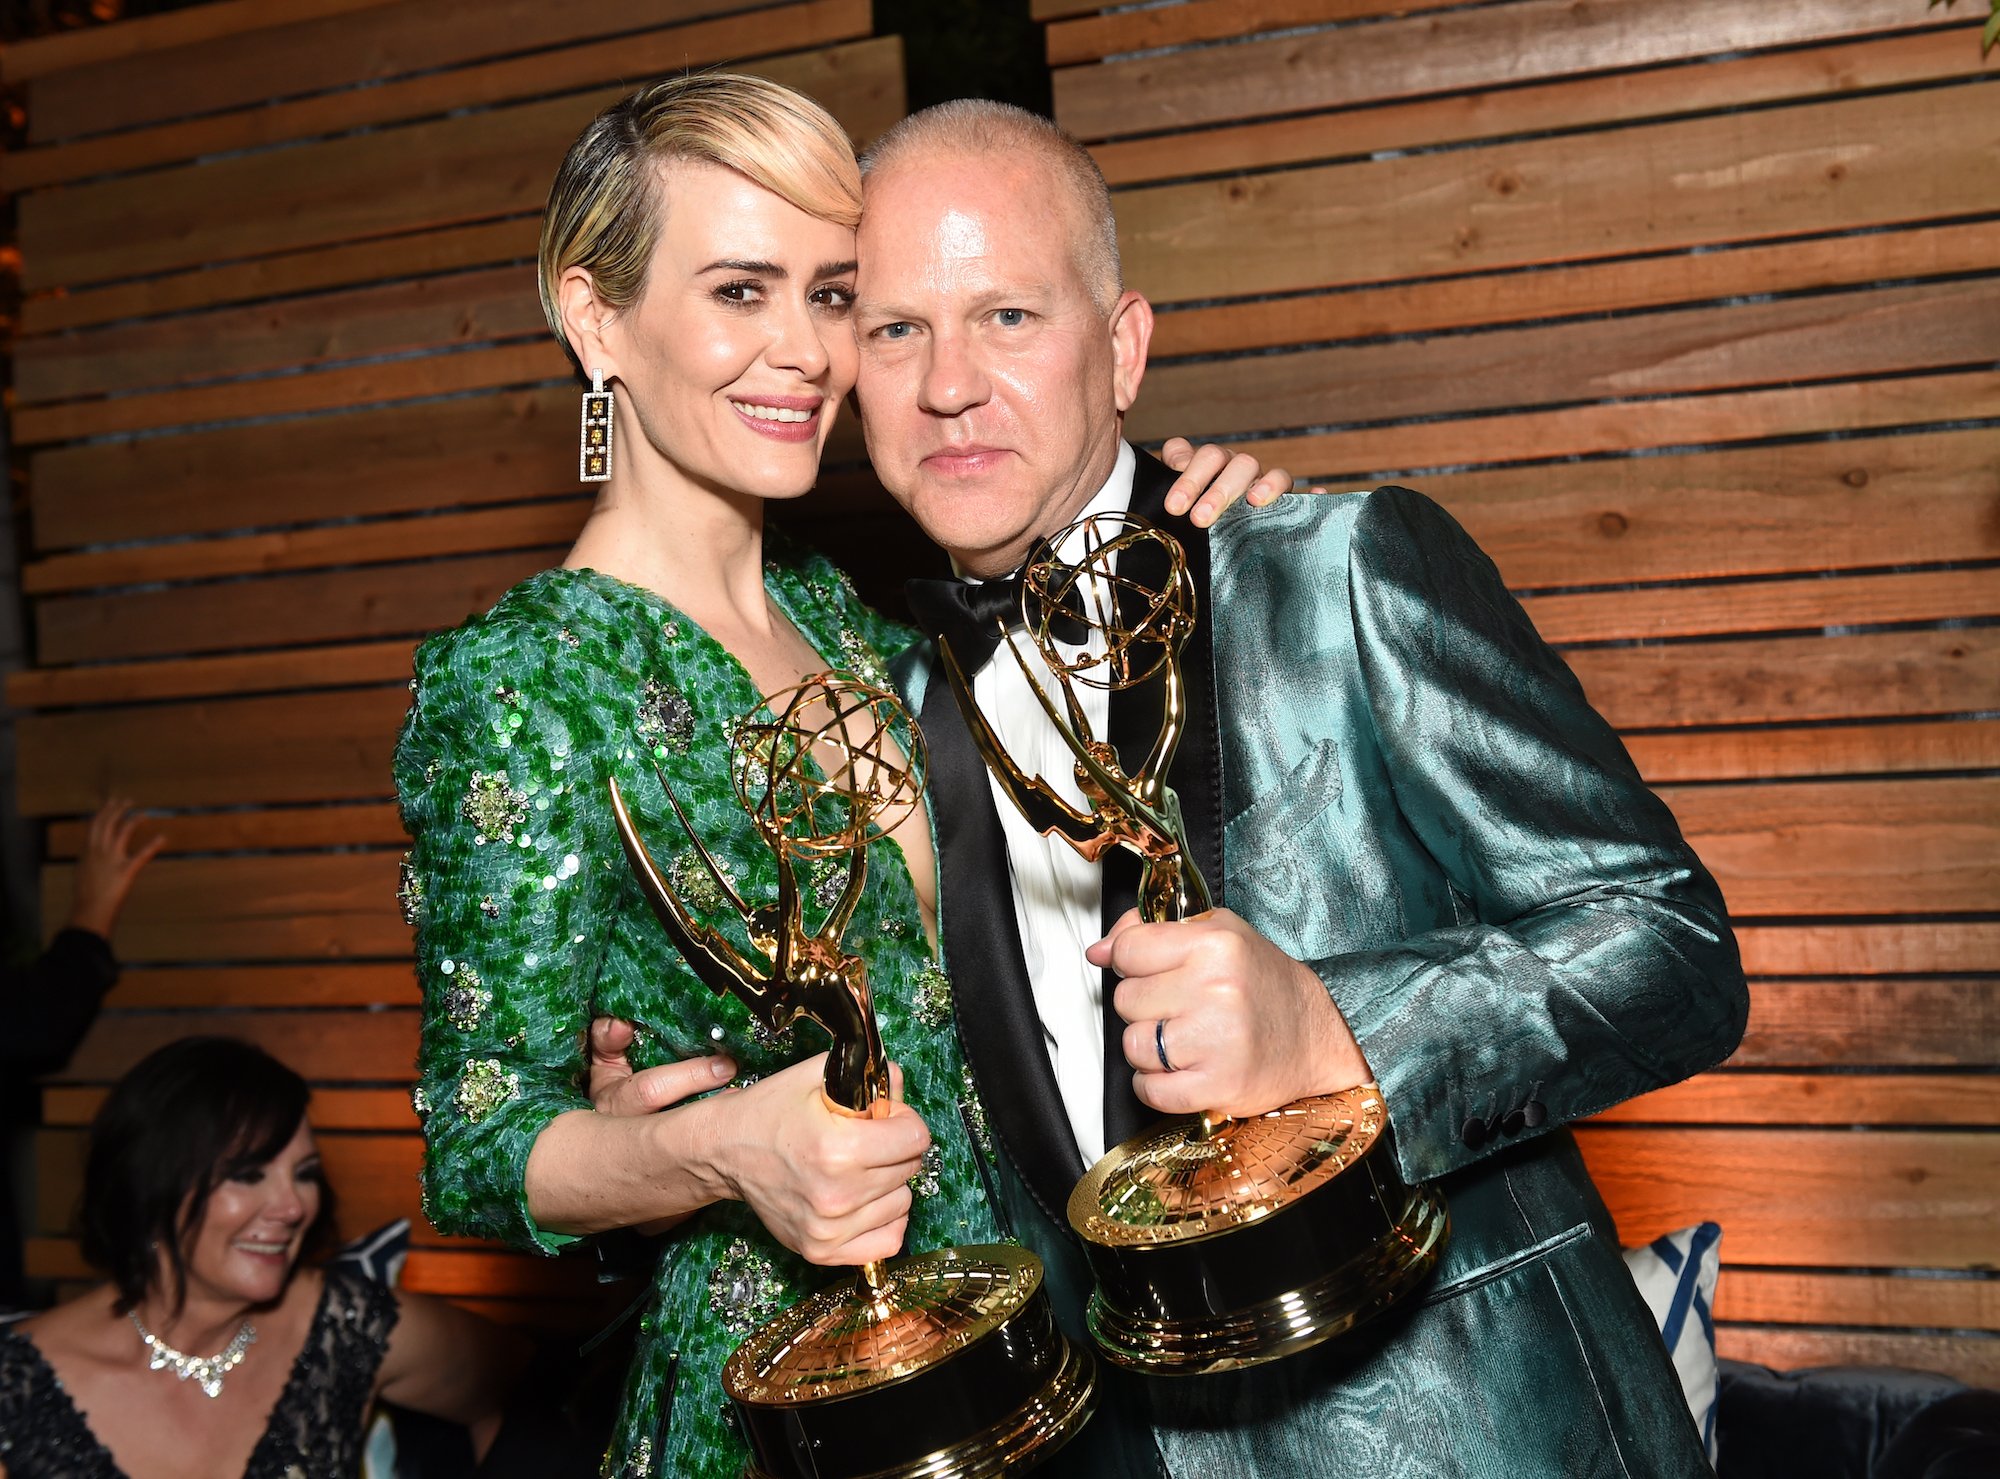 Sarah Paulson and Ryan Murphy at the FOX Broadcasting Company, FX, National Geographic, And Twentieth Century Fox Television's 68th Primetime Emmy Awards After Party on September 18, 2016.